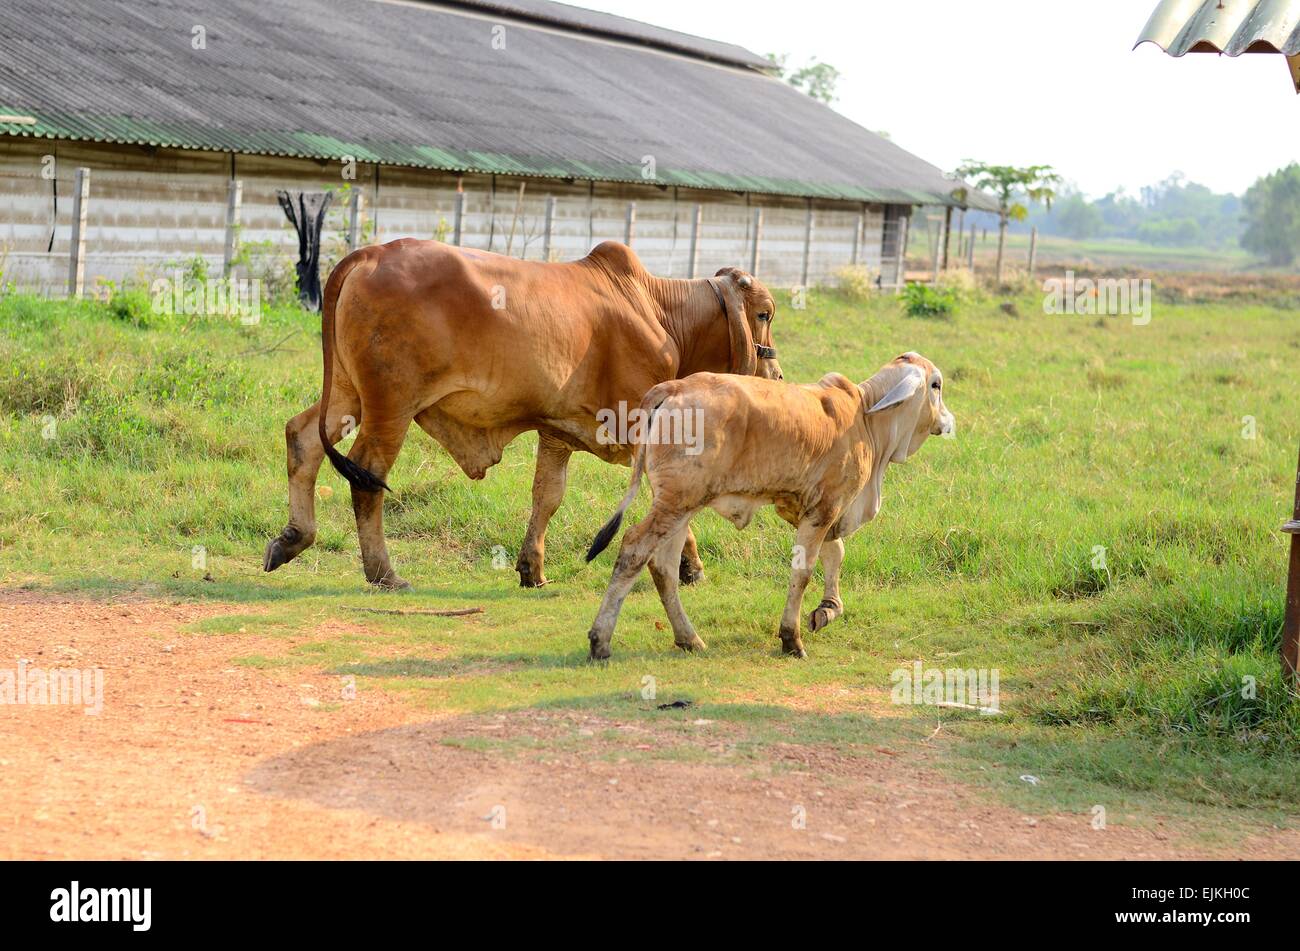 example of Thai stlye commercial cattle farm Stock Photo